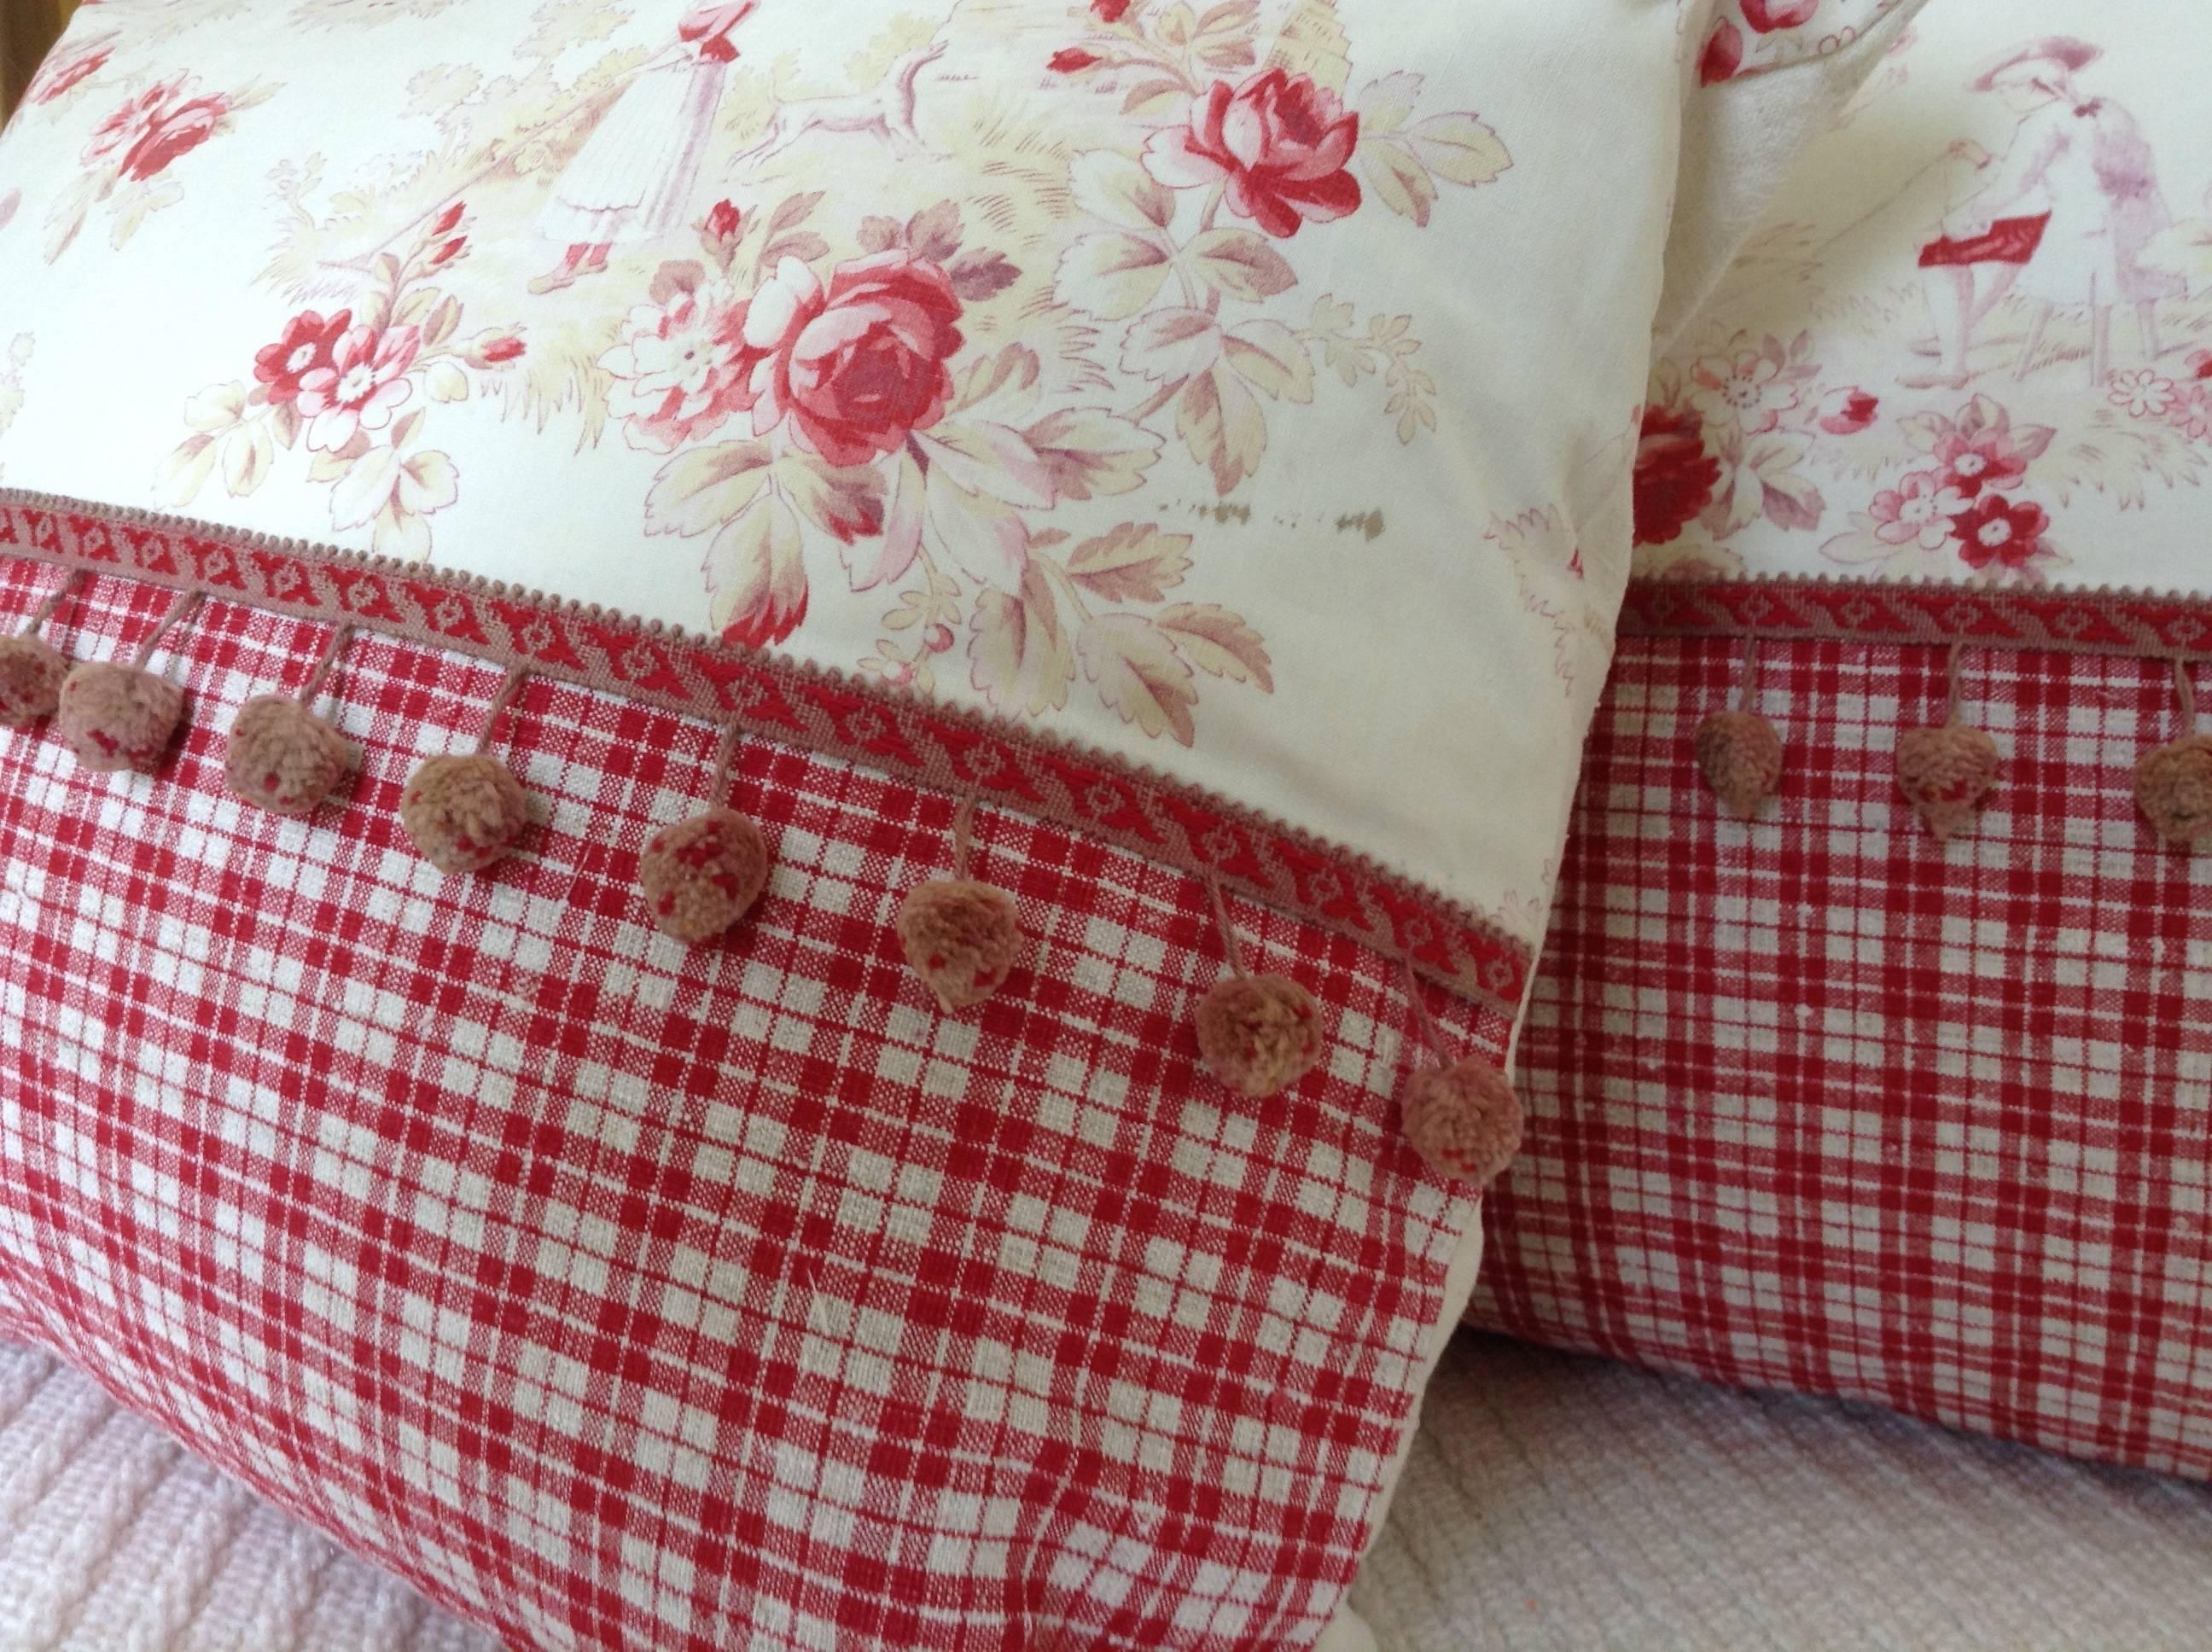 These charming pillows feature a classic French Toile de Jouy landscape depicting rural life in France. Coordinated below with an outstanding red homespun linen Kelsch and a charming pom pom trim.
Backed with a superb homespun linen and hand